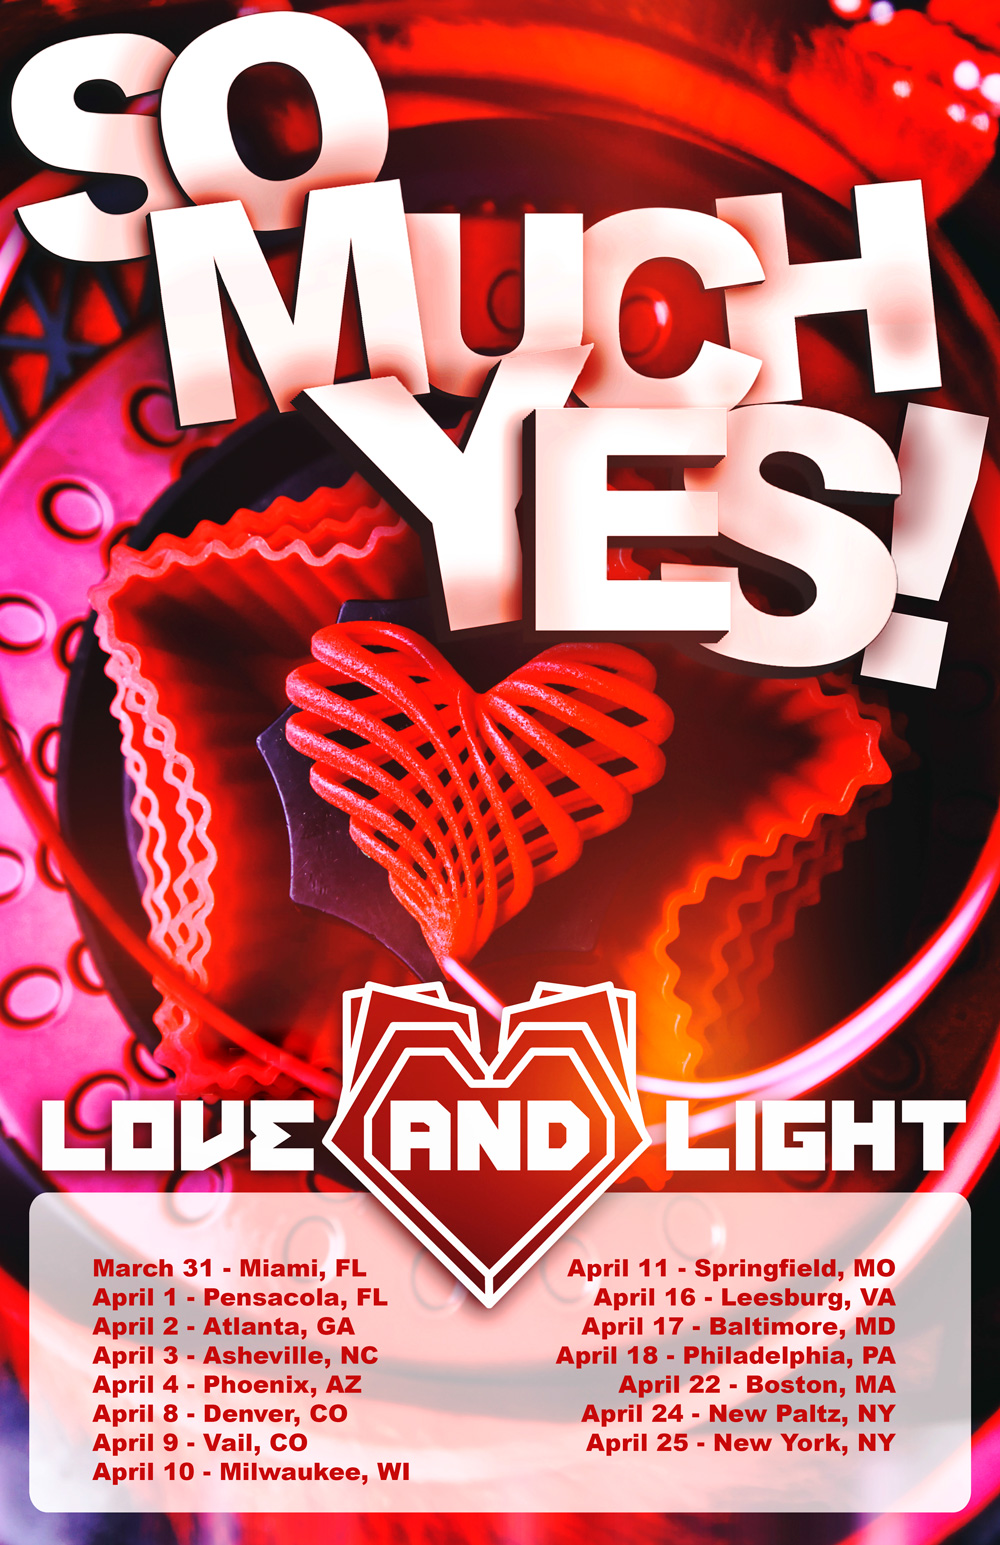 Love and Light - So Much Yes tour